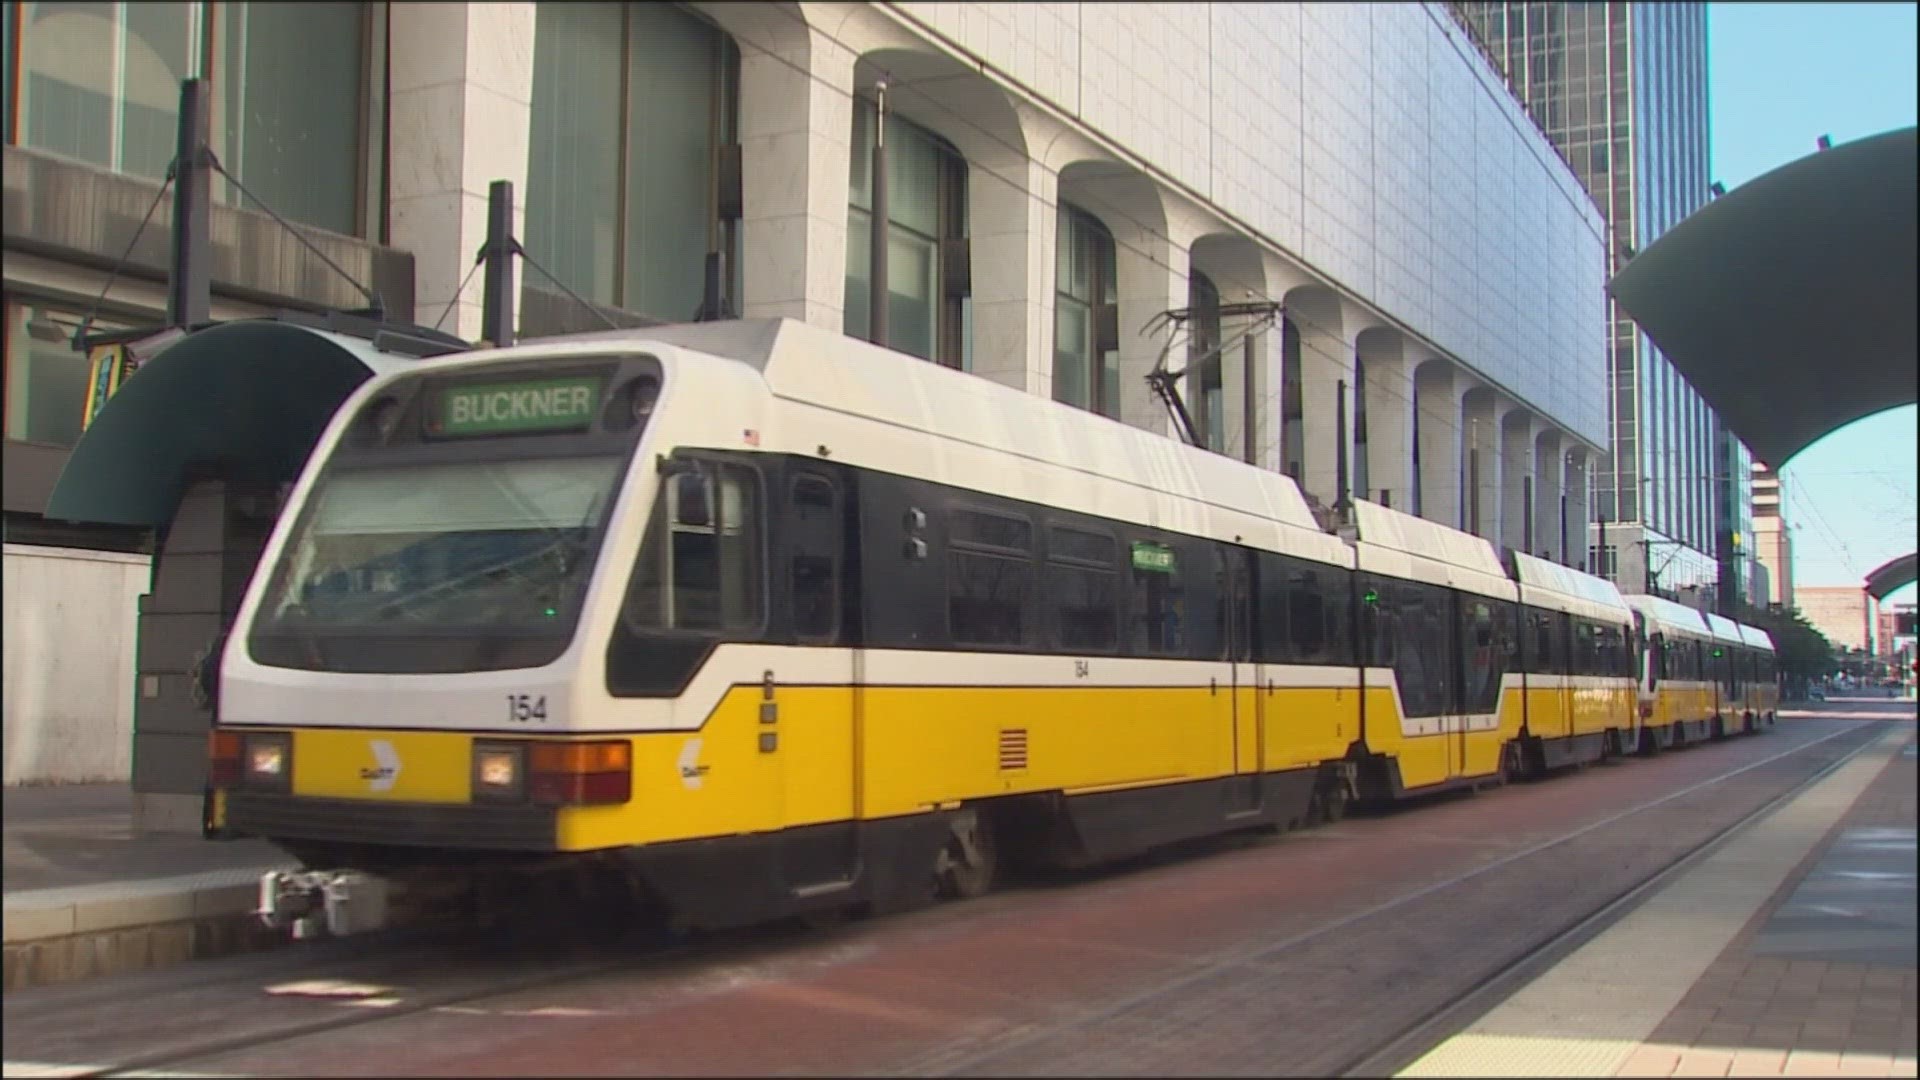 In 1983, DART was formed. Today, DART serves 43 million passenger trips a year.